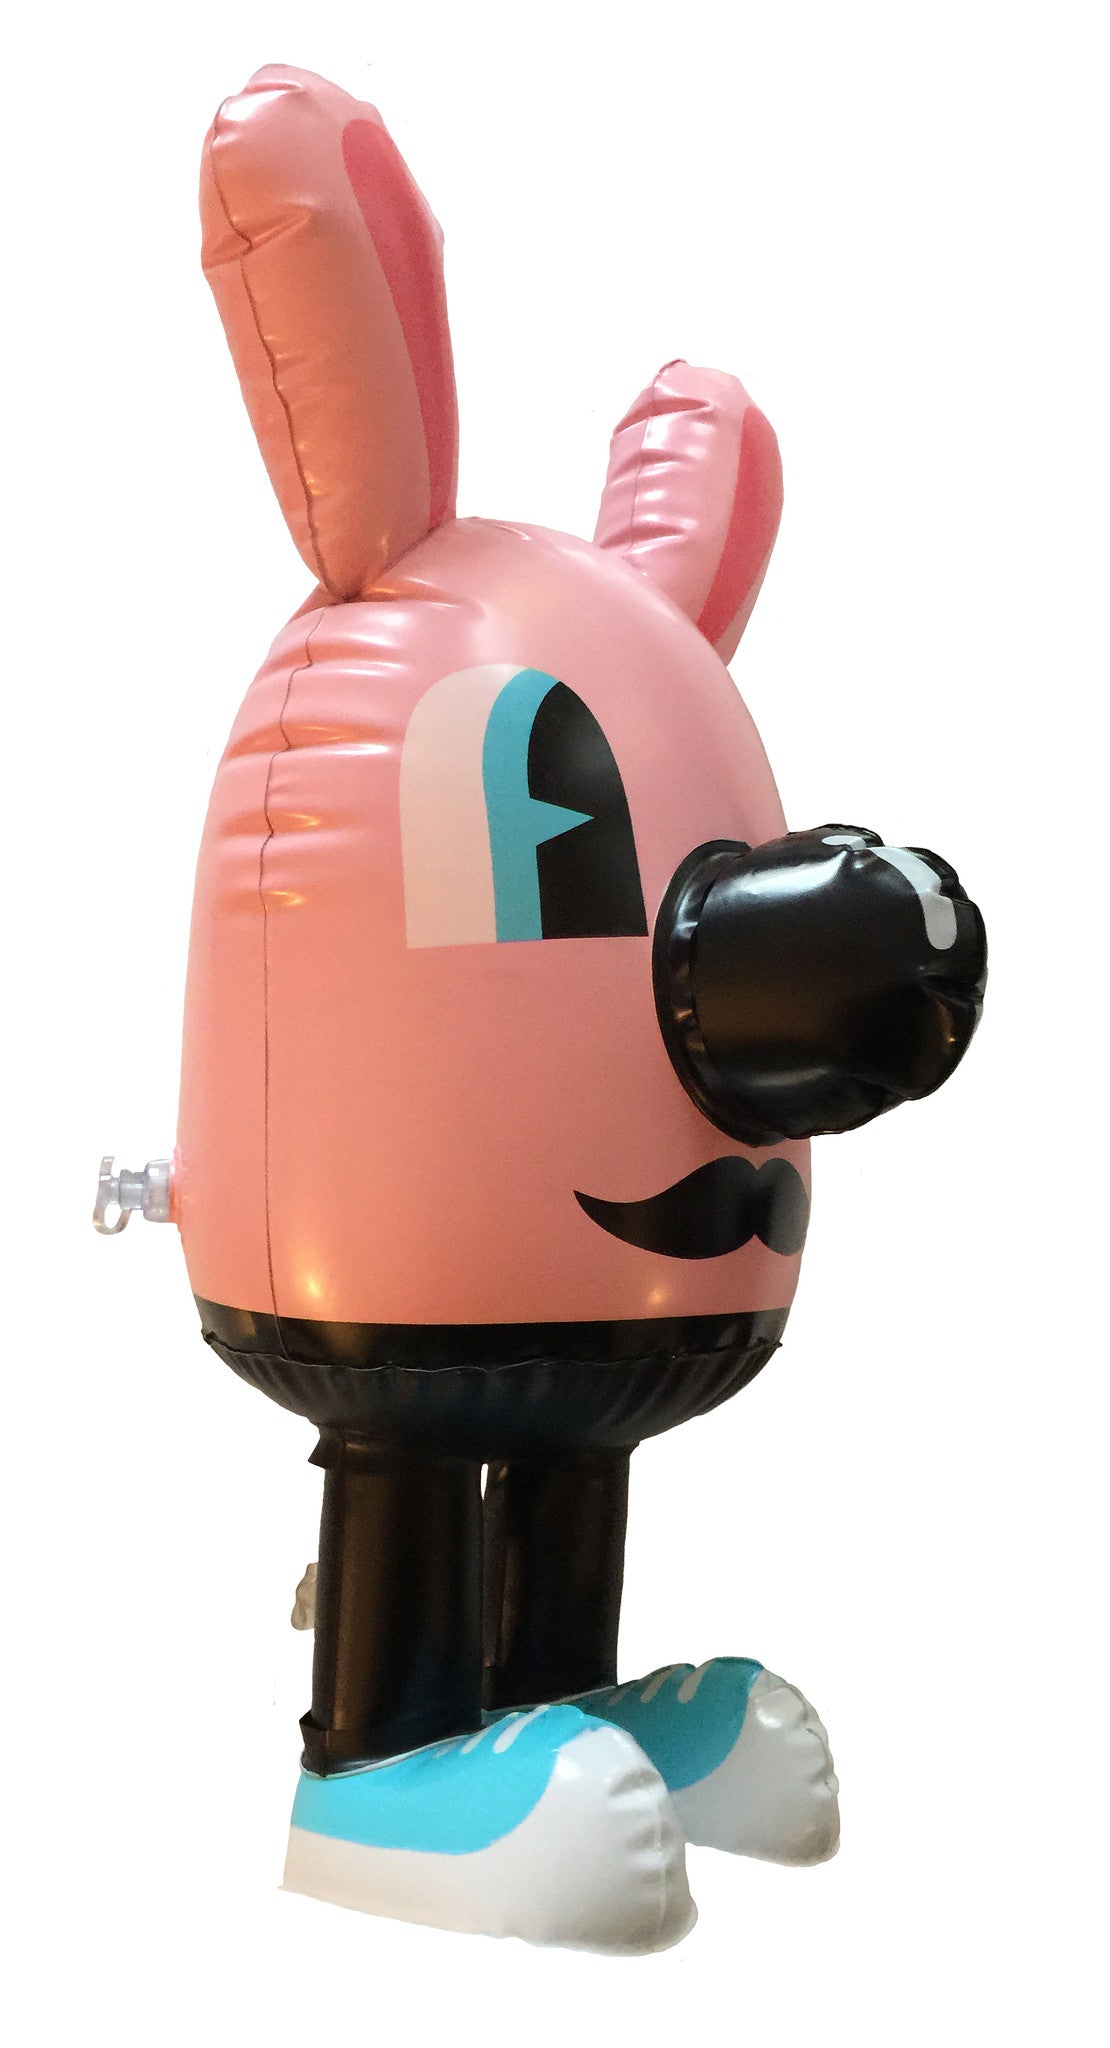 Jeremyville at Colette (signed, with inflatable)